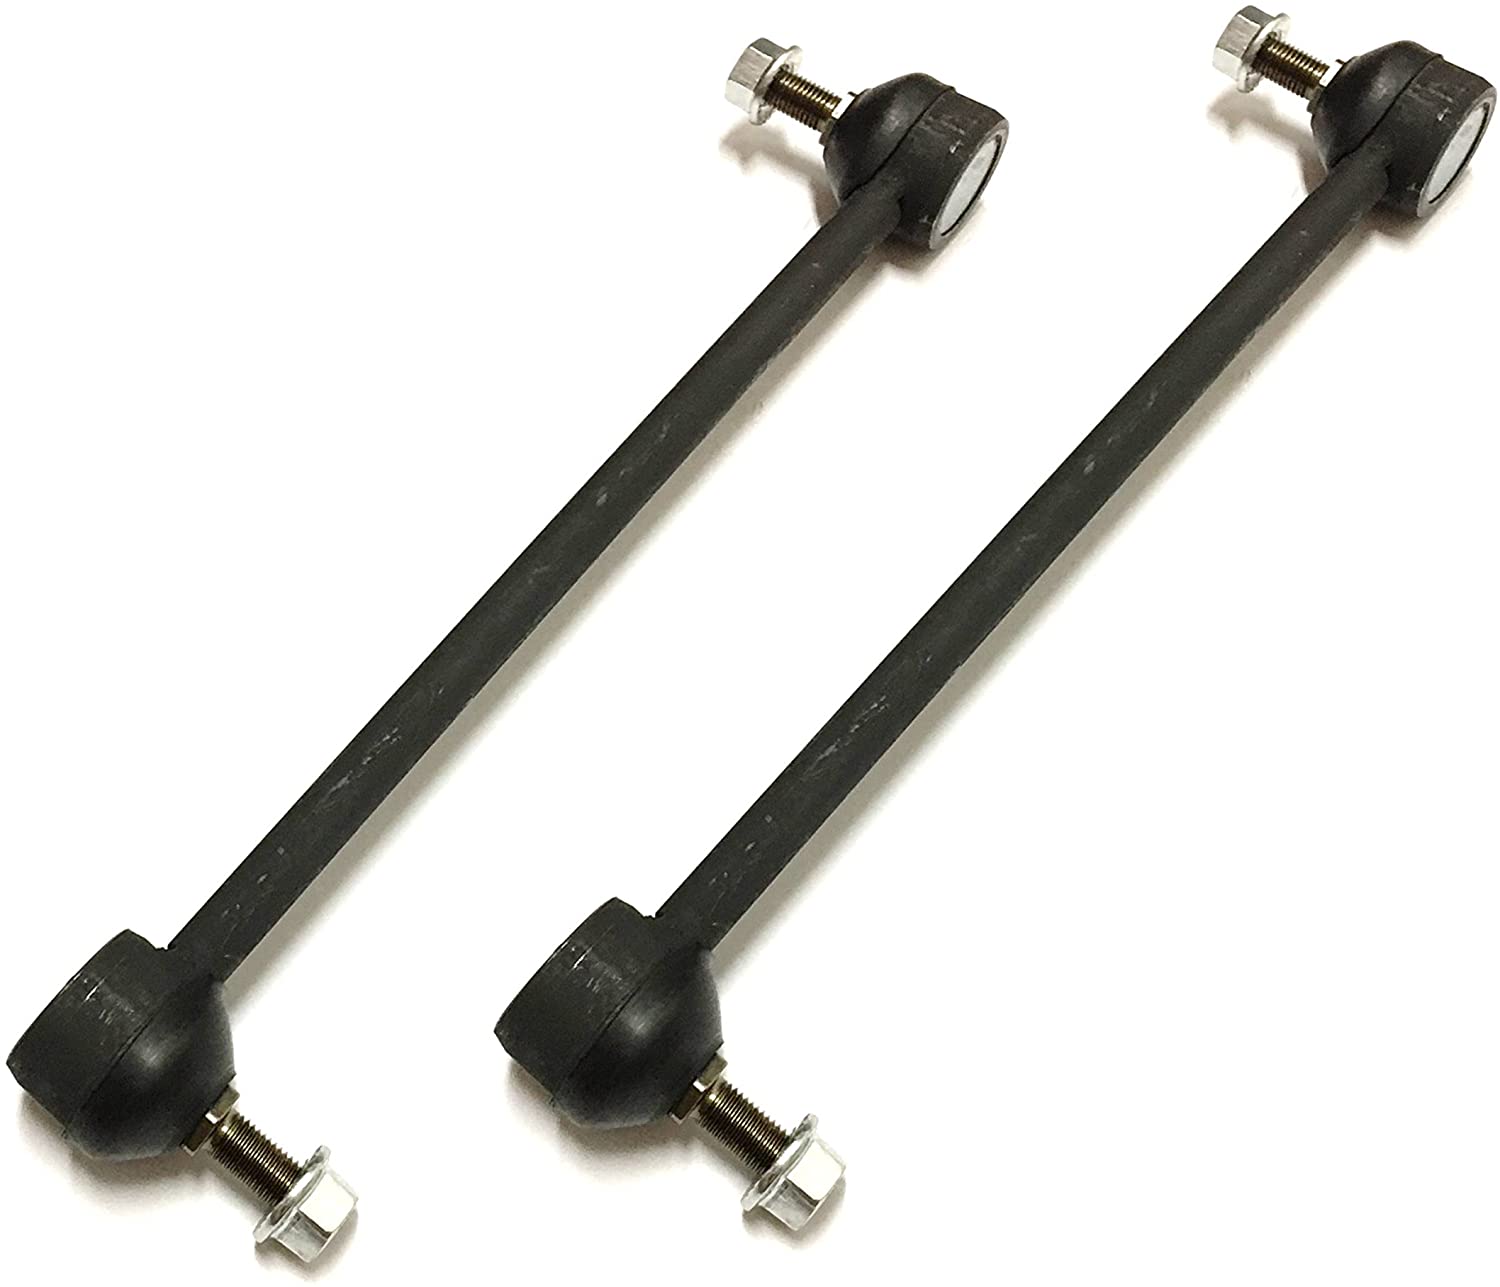 PartsW 2 Piece Suspension Kit Left & Right Sway Bar Links for Ford Taurus, Sable, Lincoln Continental & Mercury Sable